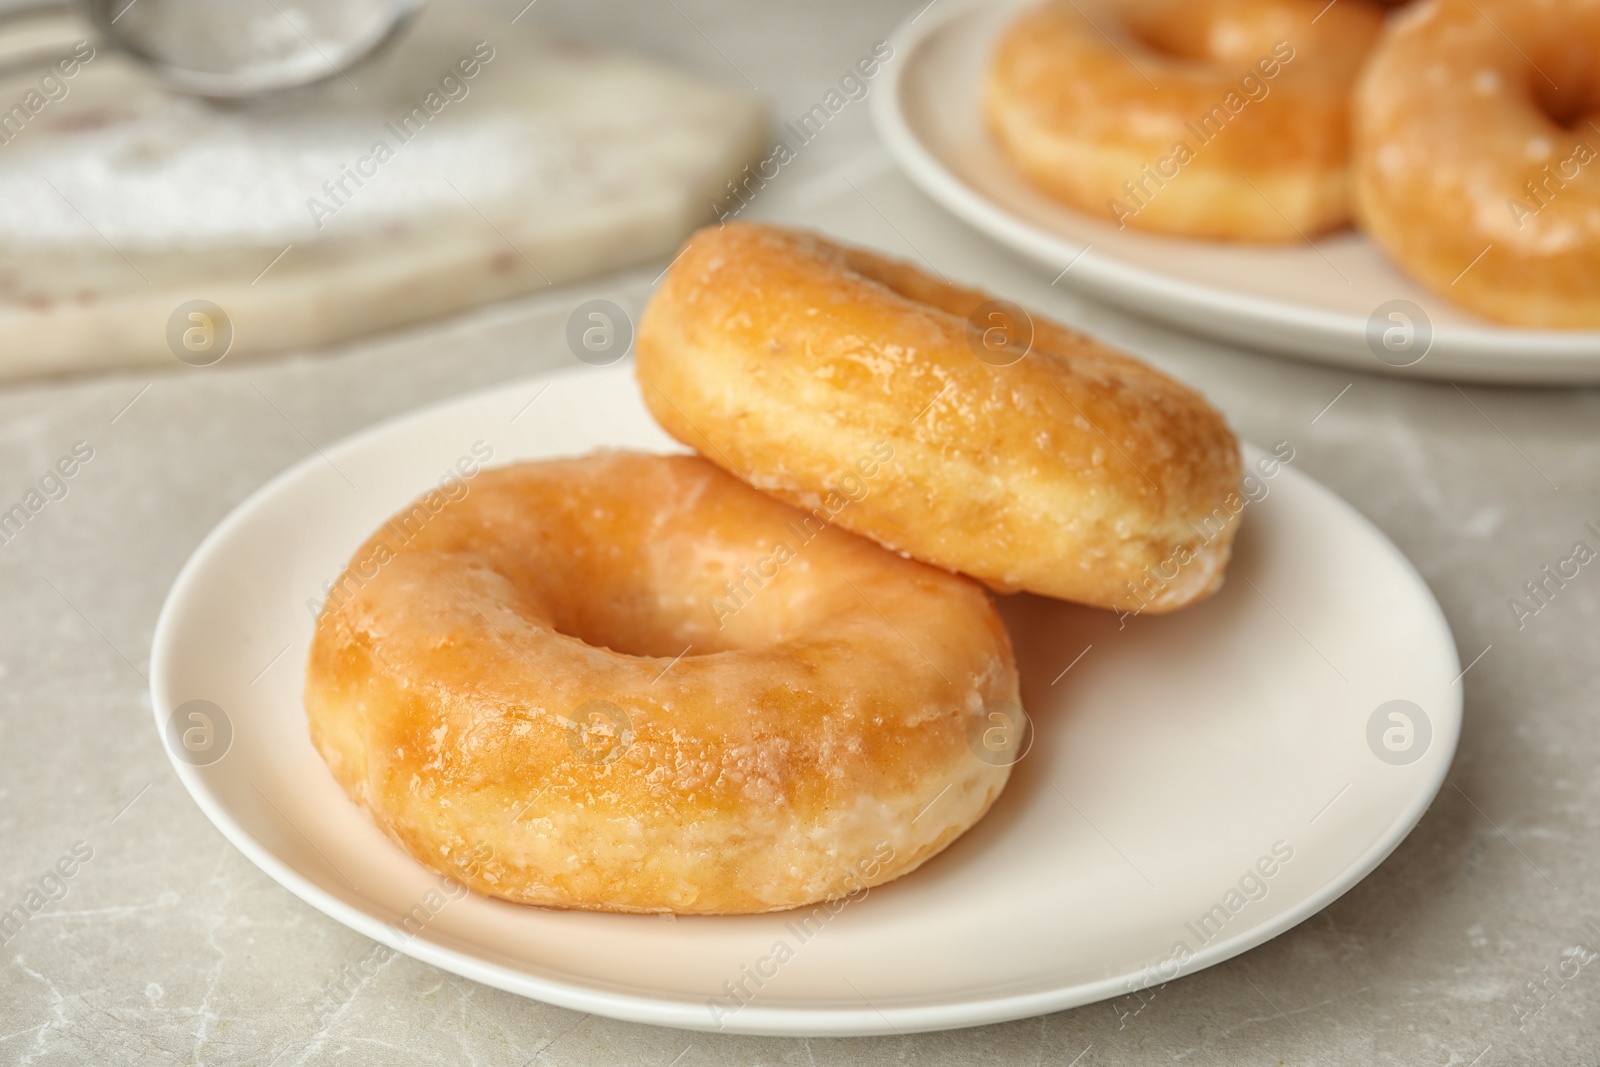 Photo of Sweet delicious glazed donuts on light table